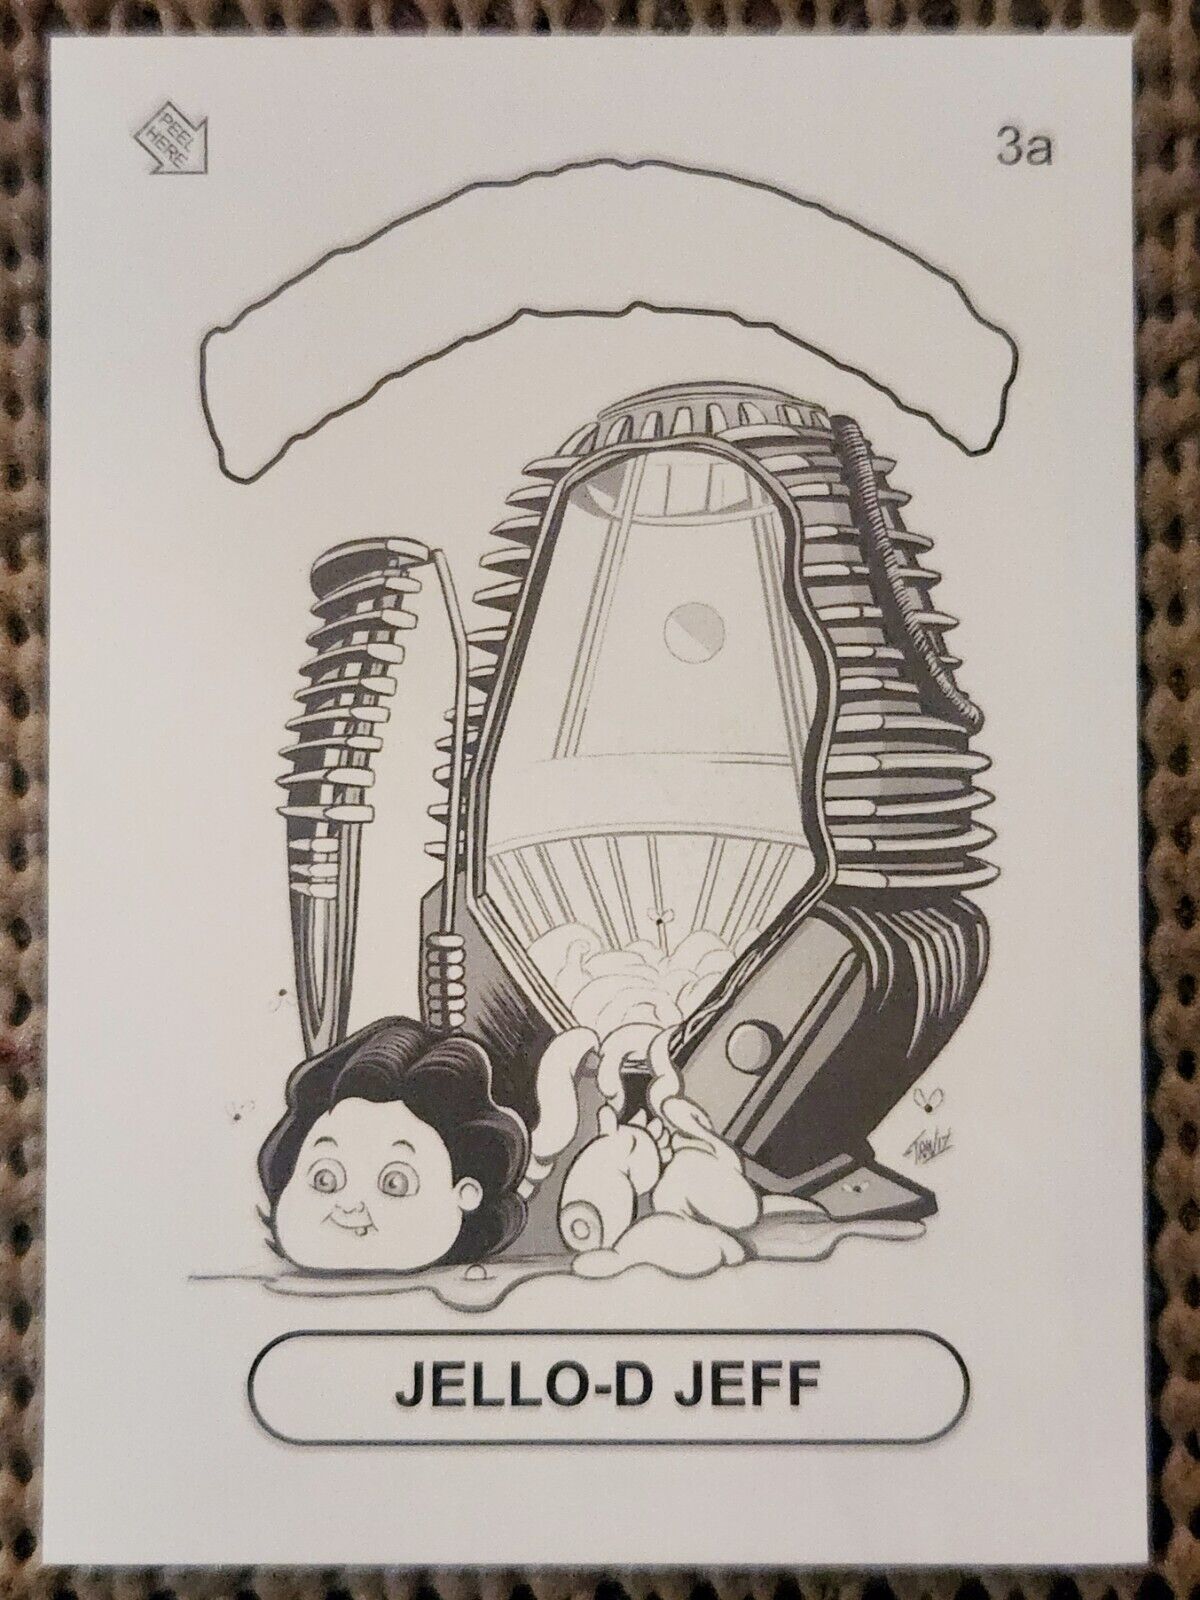 JELLO-D JEFF 2018 SSFC LUNCH BOX LEFTOVERS Gray Parallel Coloring Card SP (3a)